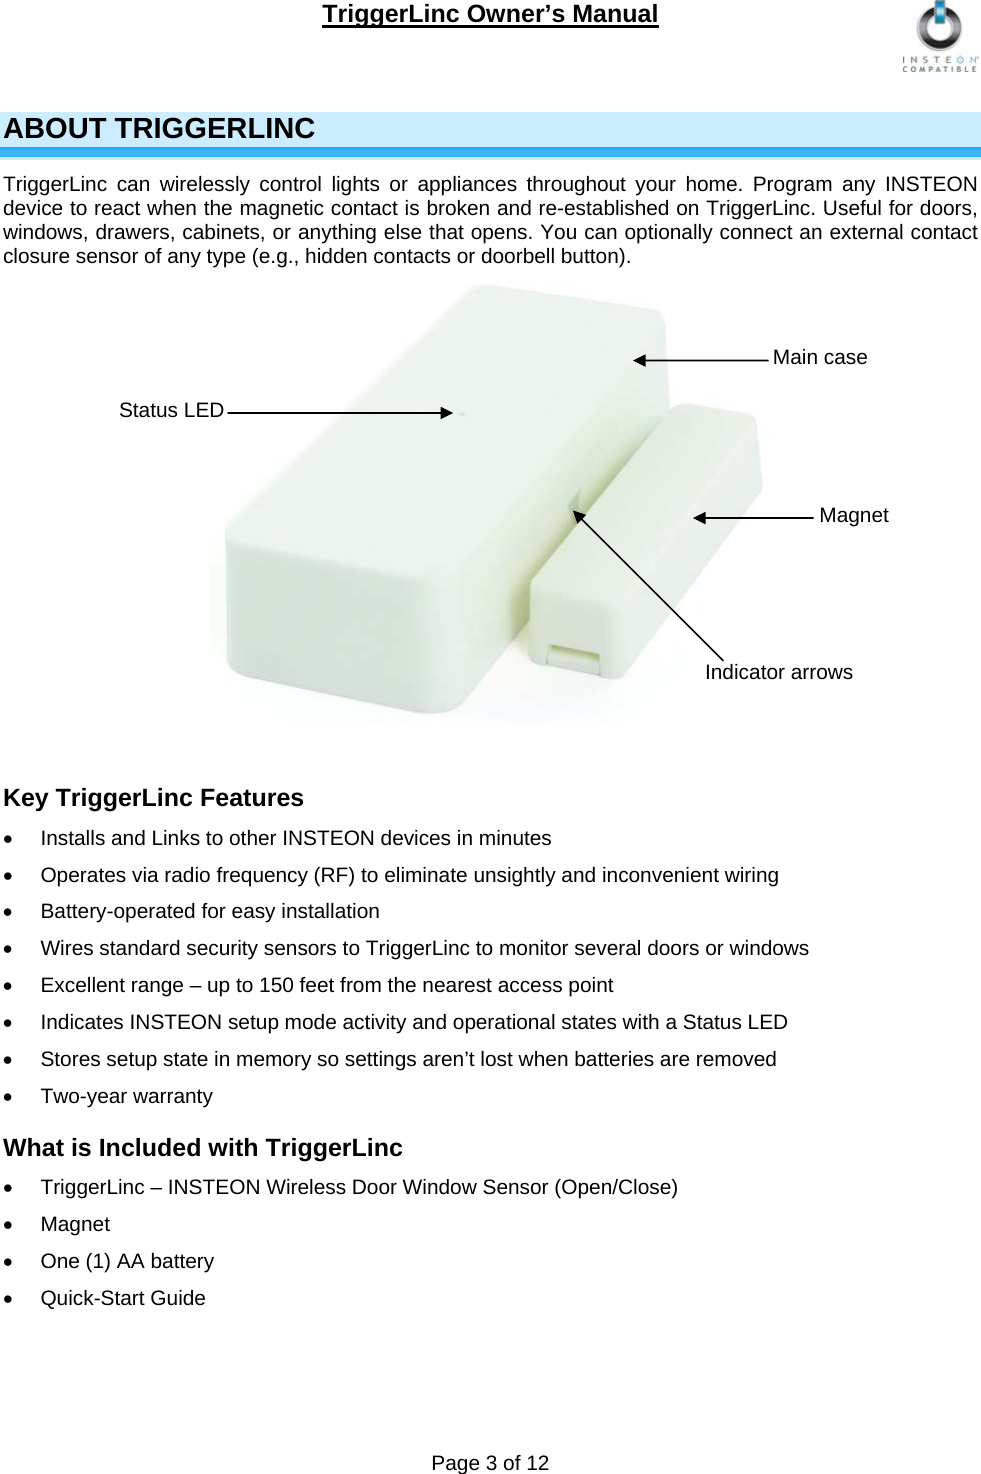 TriggerLinc Owner’s Manual   Page 3 of 12  ABOUT TRIGGERLINC TriggerLinc can wirelessly control lights or appliances throughout your home. Program any INSTEON device to react when the magnetic contact is broken and re-established on TriggerLinc. Useful for doors, windows, drawers, cabinets, or anything else that opens. You can optionally connect an external contact closure sensor of any type (e.g., hidden contacts or doorbell button).             Key TriggerLinc Features   Installs and Links to other INSTEON devices in minutes     Operates via radio frequency (RF) to eliminate unsightly and inconvenient wiring    Battery-operated for easy installation   Wires standard security sensors to TriggerLinc to monitor several doors or windows   Excellent range – up to 150 feet from the nearest access point    Indicates INSTEON setup mode activity and operational states with a Status LED     Stores setup state in memory so settings aren’t lost when batteries are removed  Two-year warranty  What is Included with TriggerLinc   TriggerLinc – INSTEON Wireless Door Window Sensor (Open/Close)  Magnet   One (1) AA battery   Quick-Start Guide    Status LED  Main case Magnet Indicator arrows 